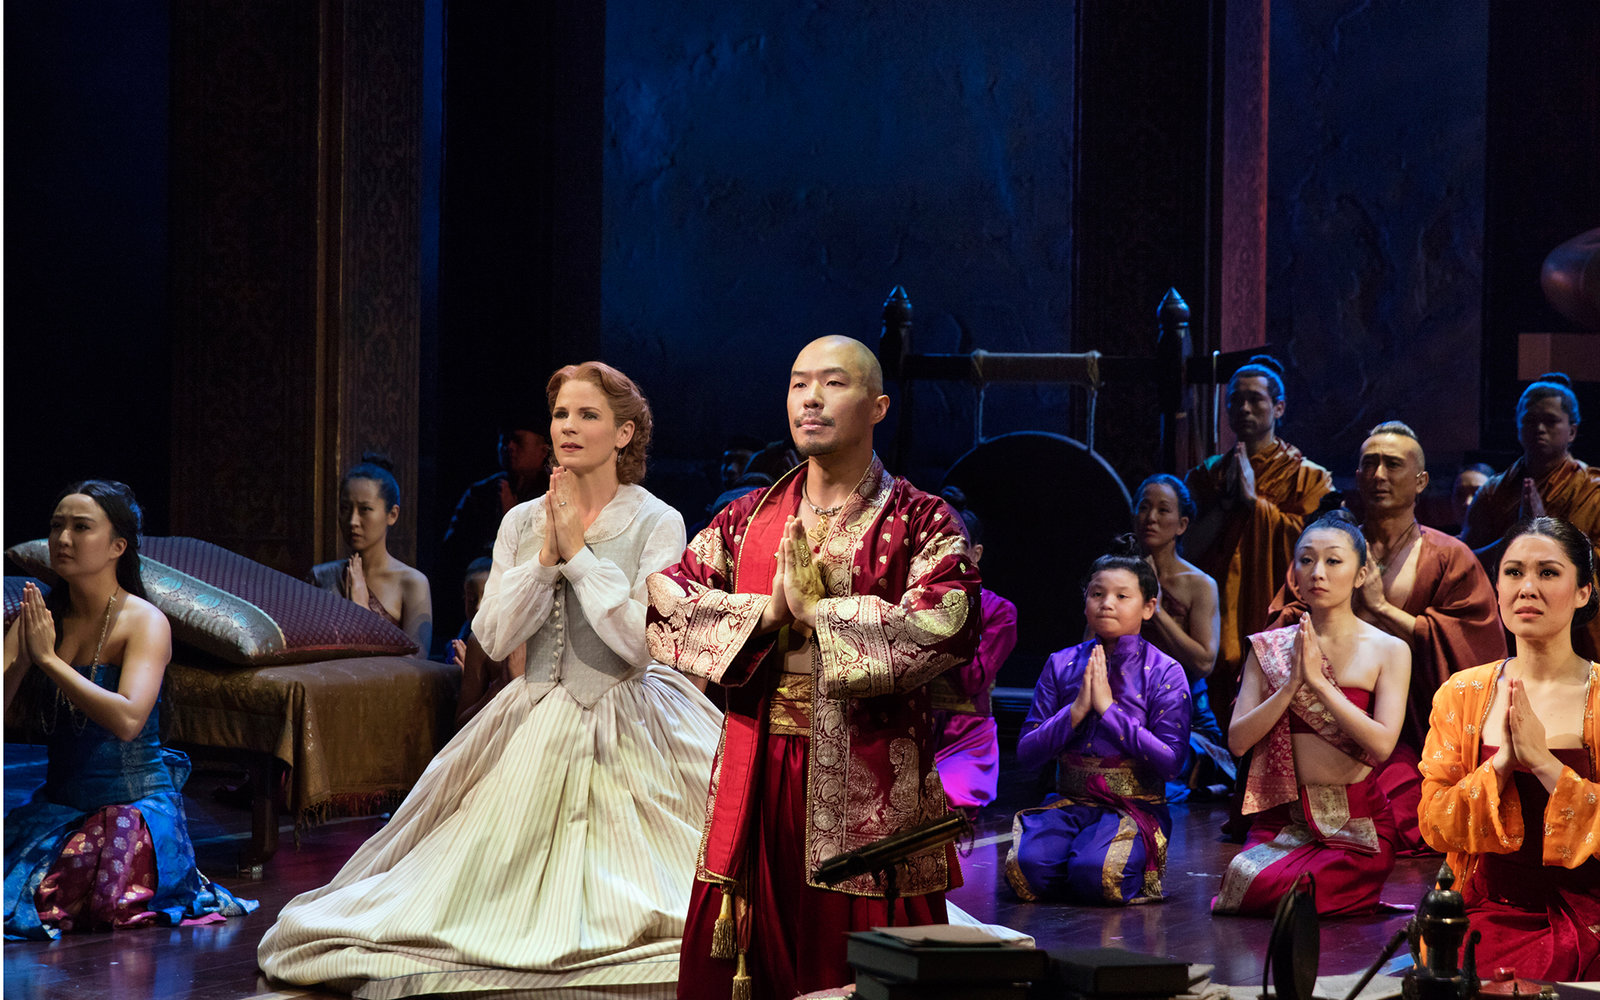 Broadway show, The King & I